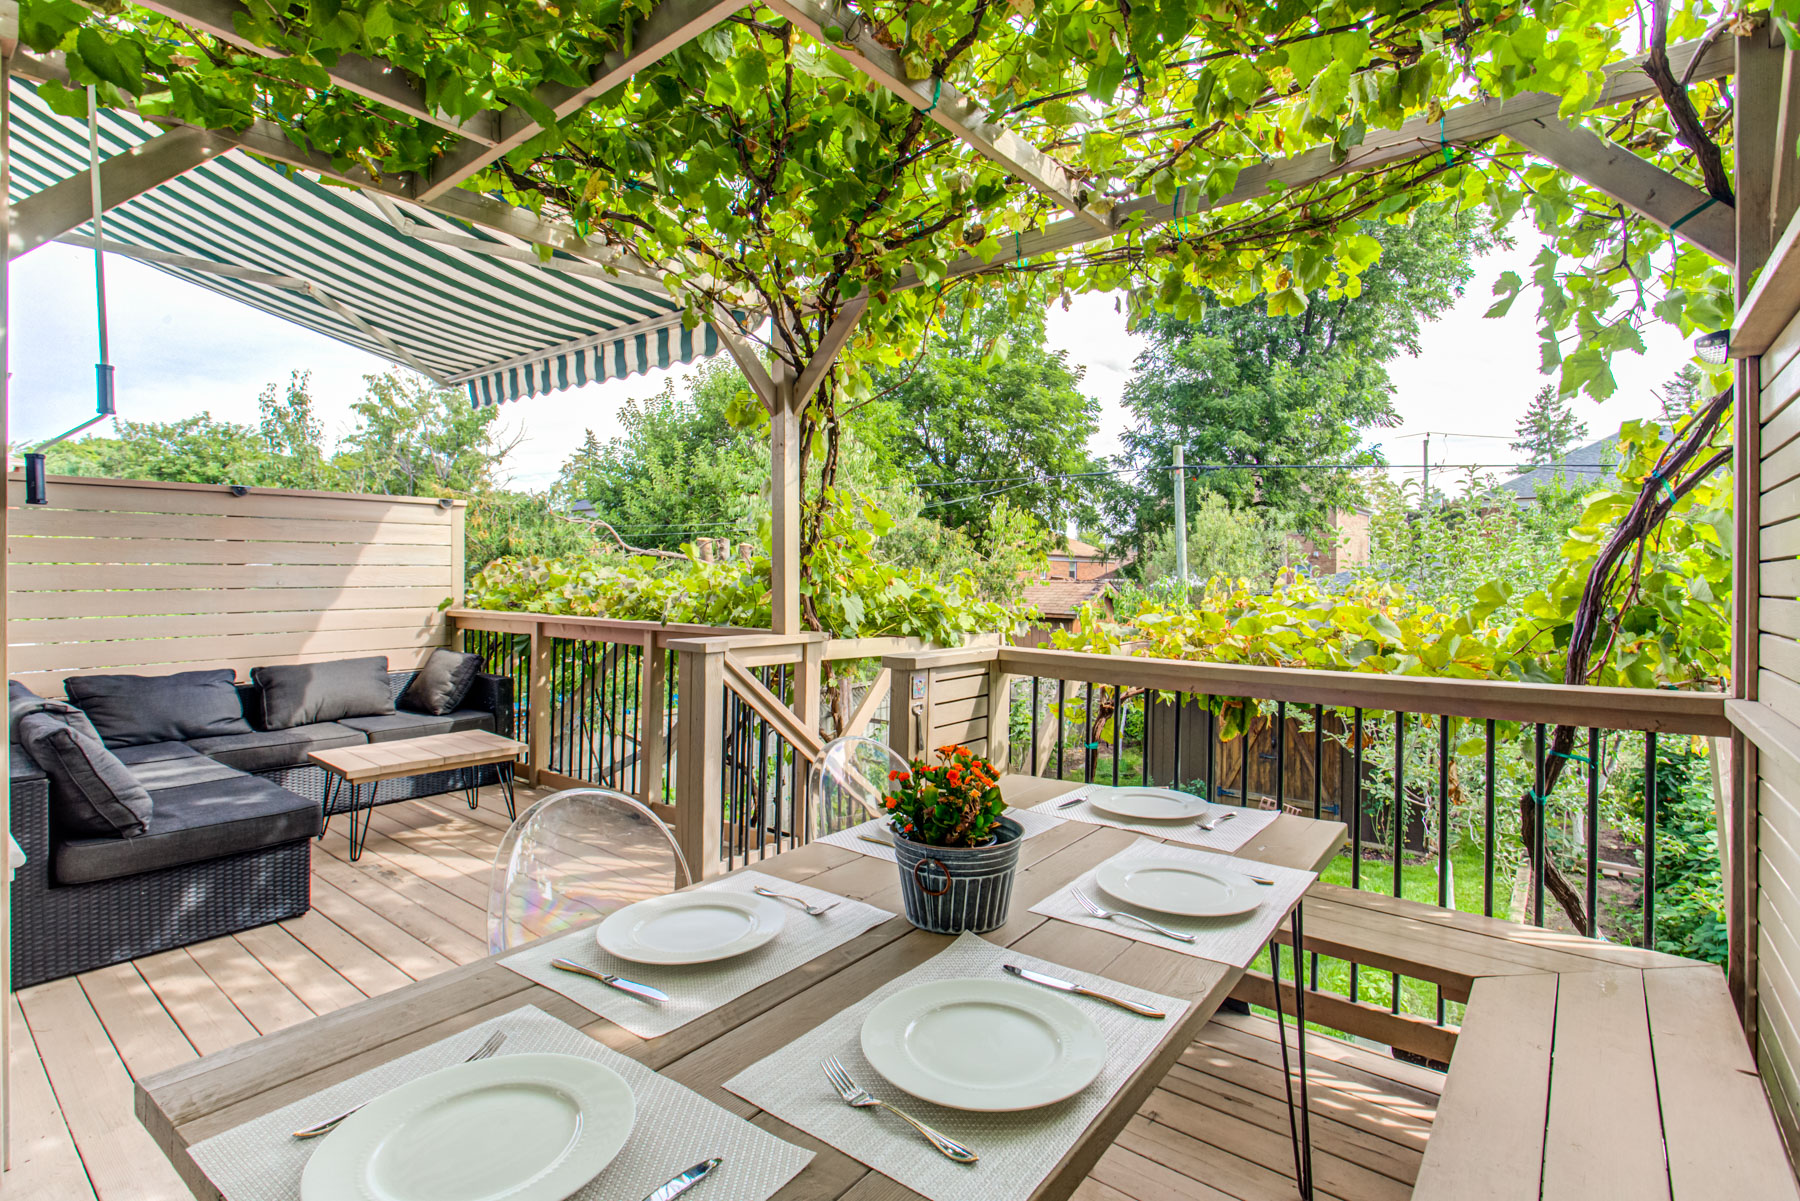 Wooden deck with retractable awning, table, seats and canopy hung with grape vines.